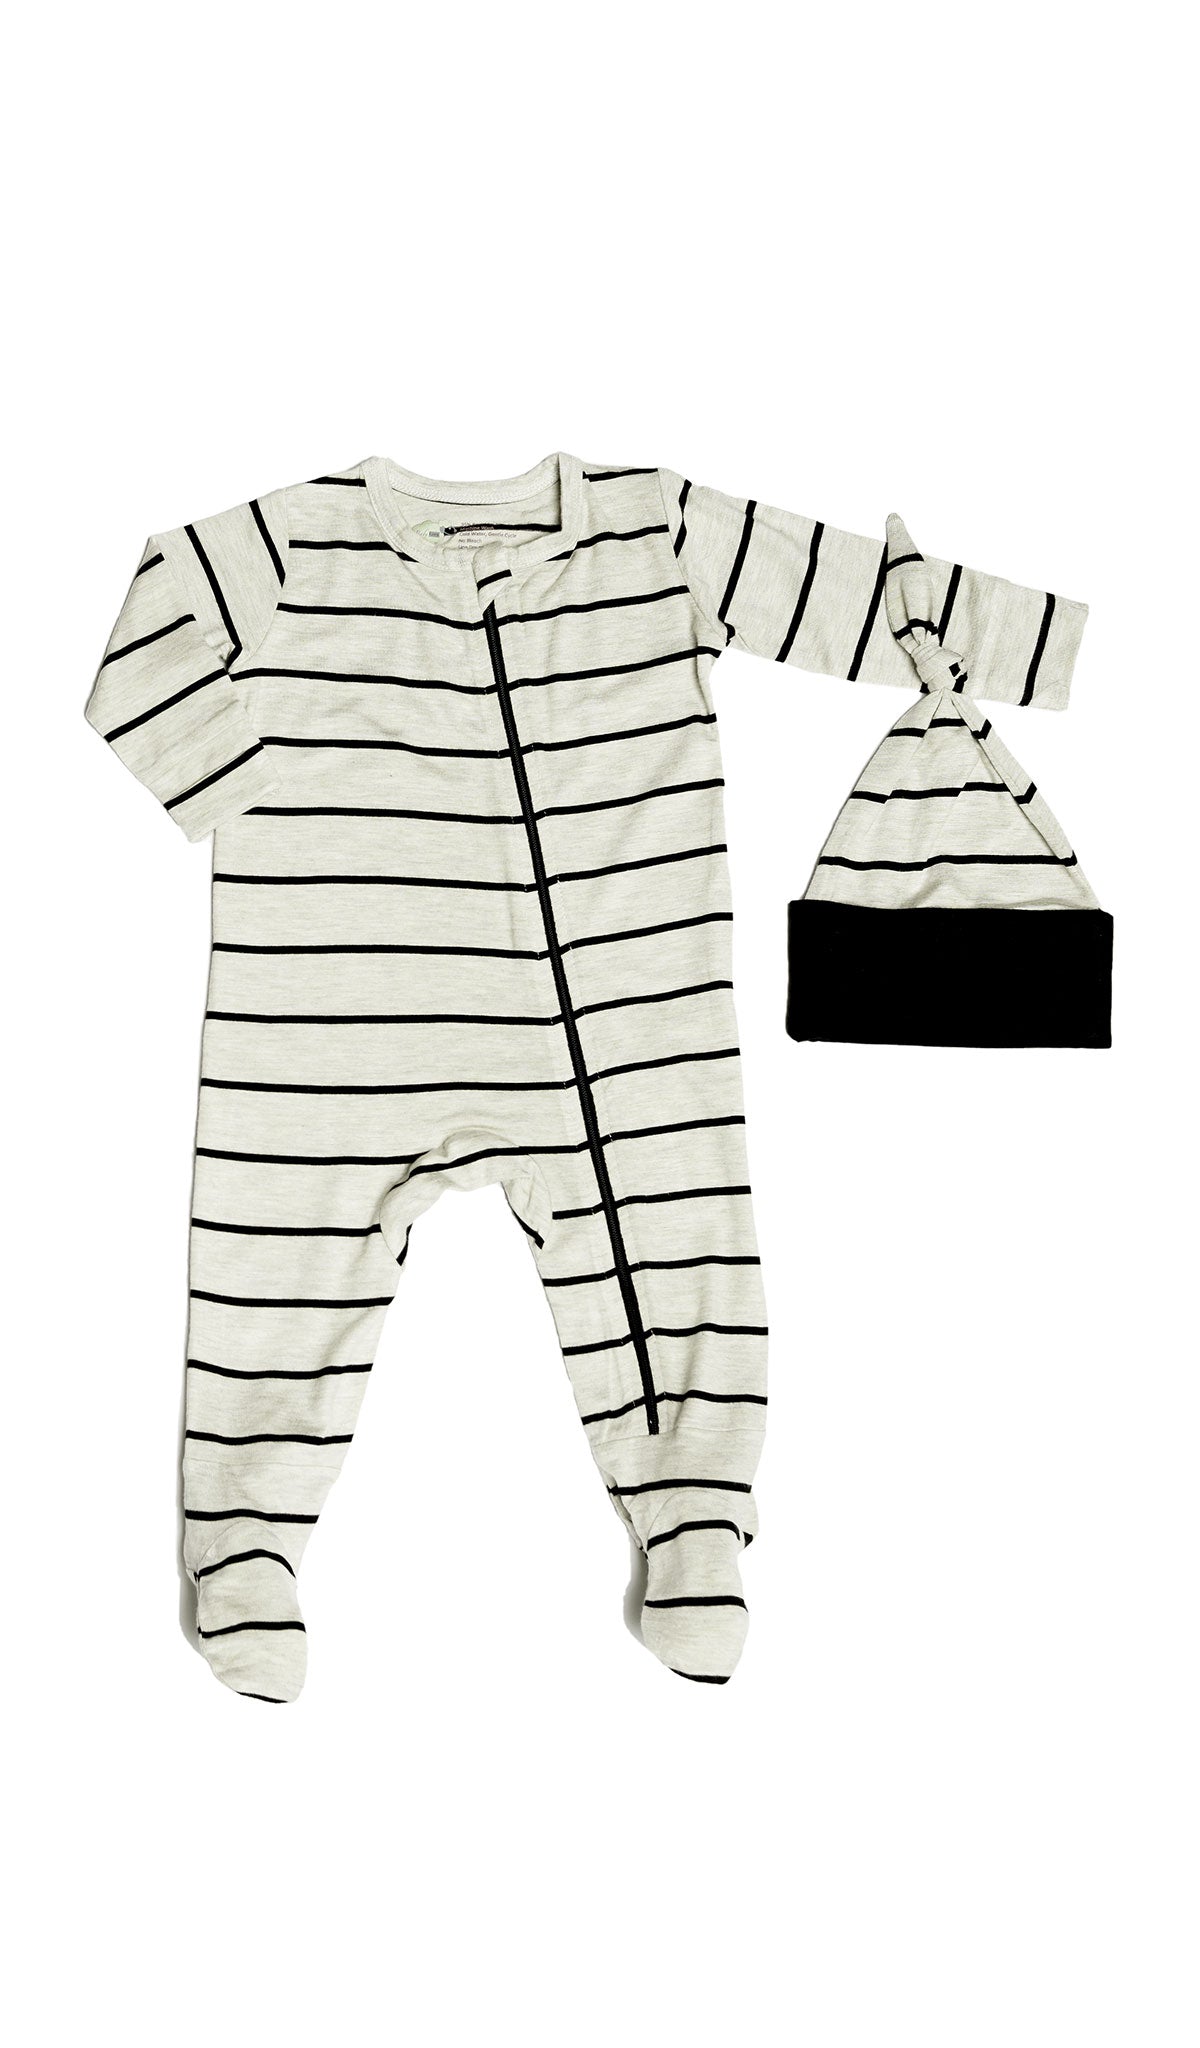 Sand Stripe Footie 2-Piece with long sleeves, zip front and matching knotted baby hat.